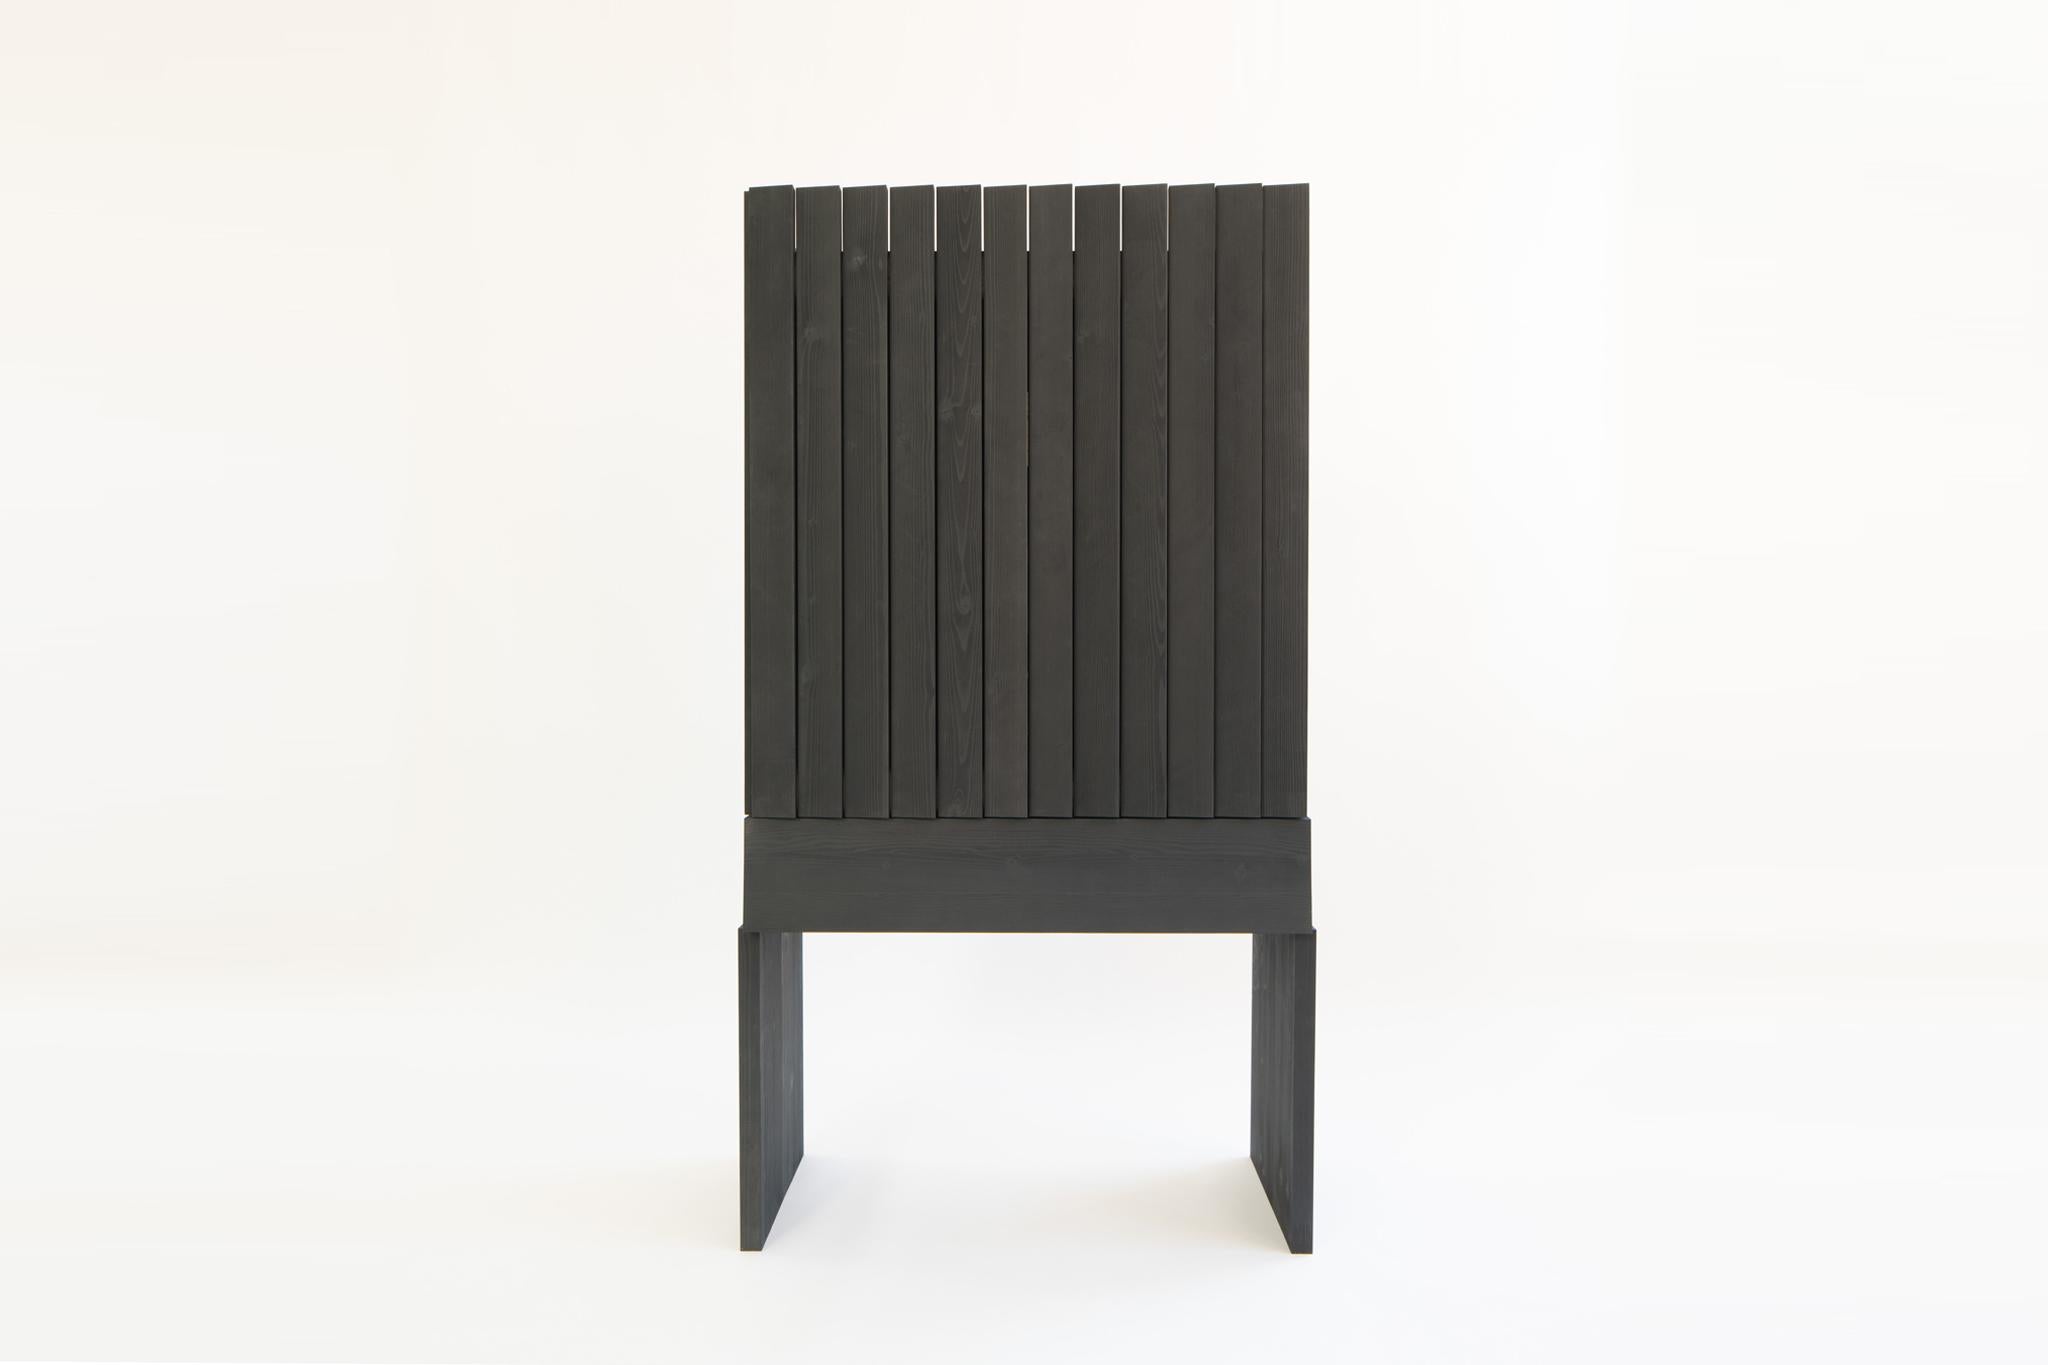 Ritual cabinet by Jude Di Leo
Dimensions: W 102 x D 51 x H 183 cm
Materials: Ink dyed Hemlock, Blackened Steel & Bronze Mirror

Ritual Cabinet is an exploration in contrast. Utilizing humble materials and high aesthetics it presents a dichotomy of